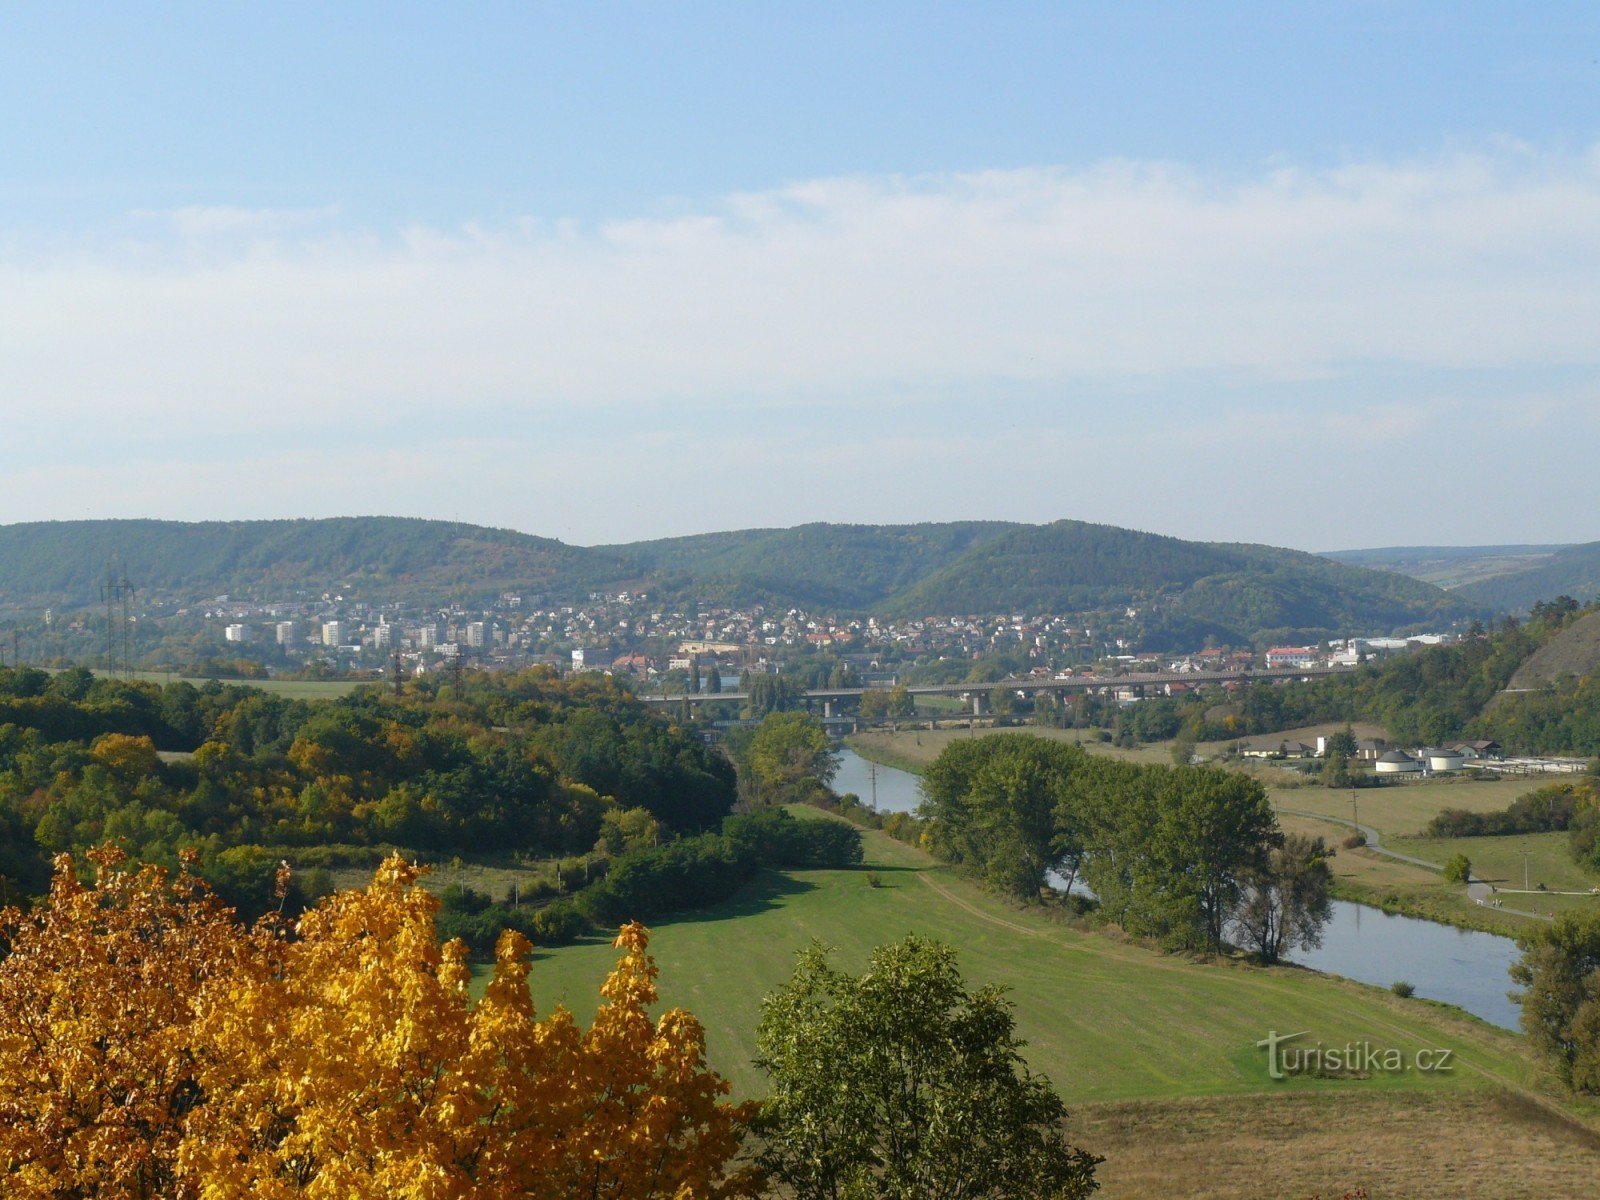 View from Tetín to the city of Beroun